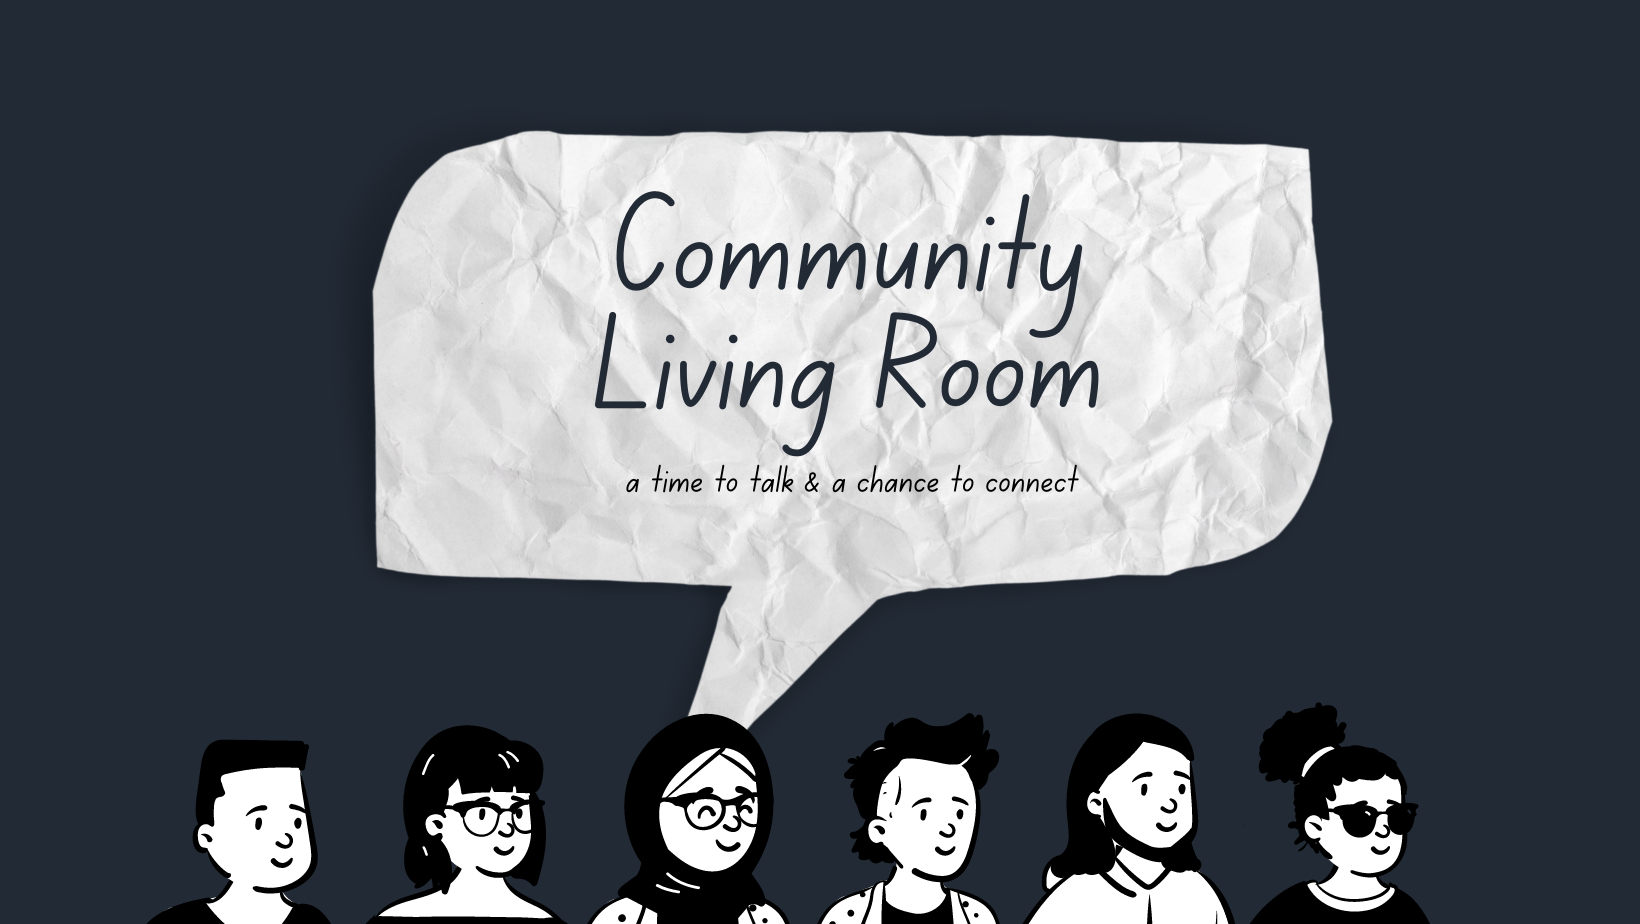 Illustrations of six people of diverse gender and ethnicity stand in front of a large speech bubble that reads "Community Living Room: A time to talk and a chance to connect"